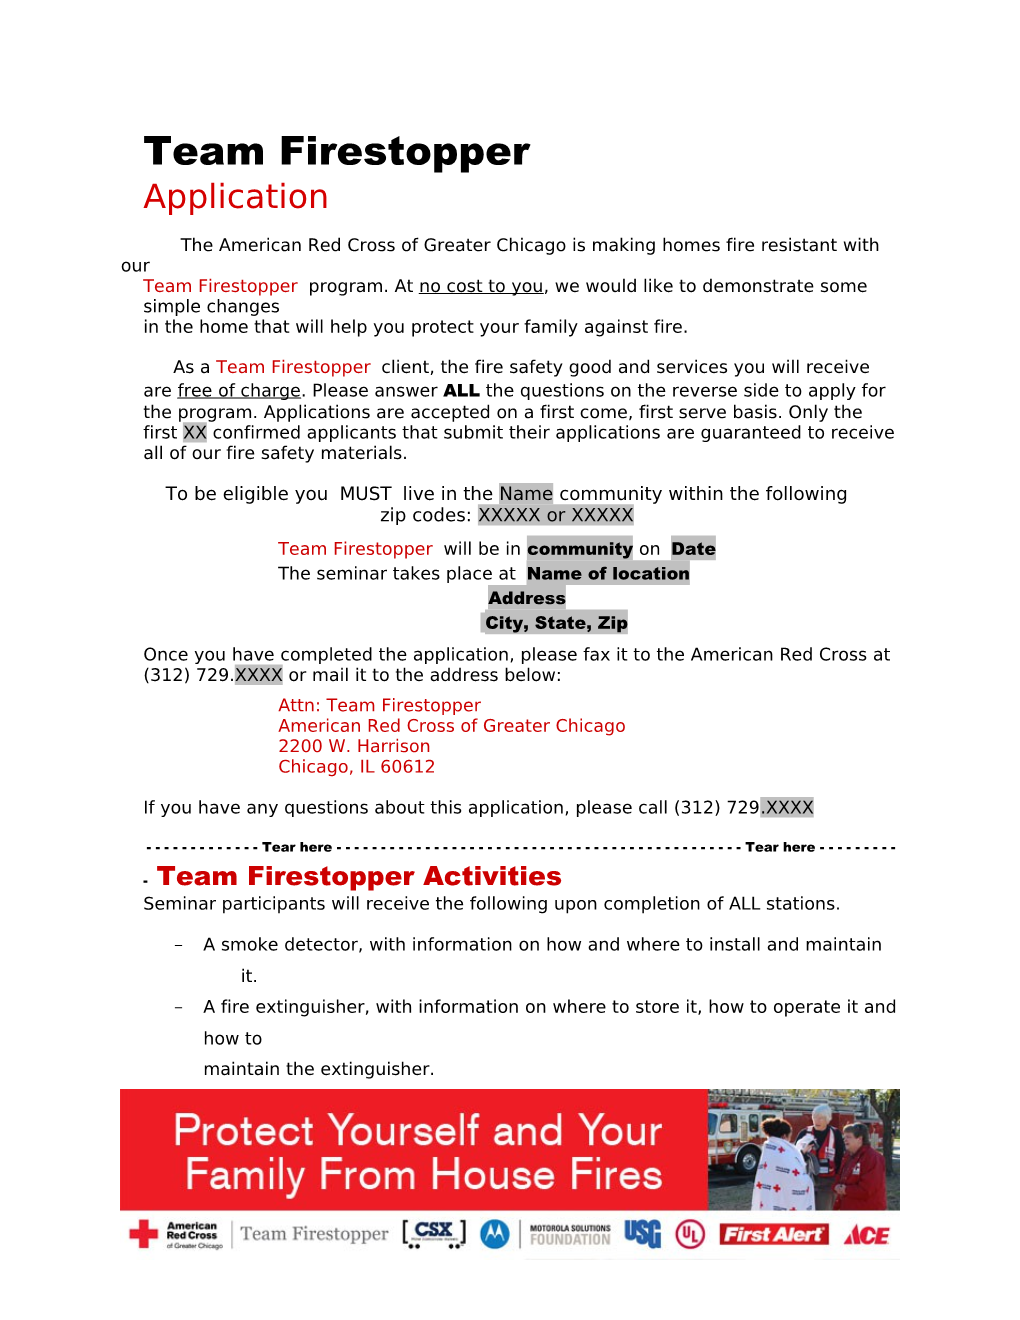 Team Firestopper Program. at No Cost to You, We Would Like to Demonstrate Some Simple Changes